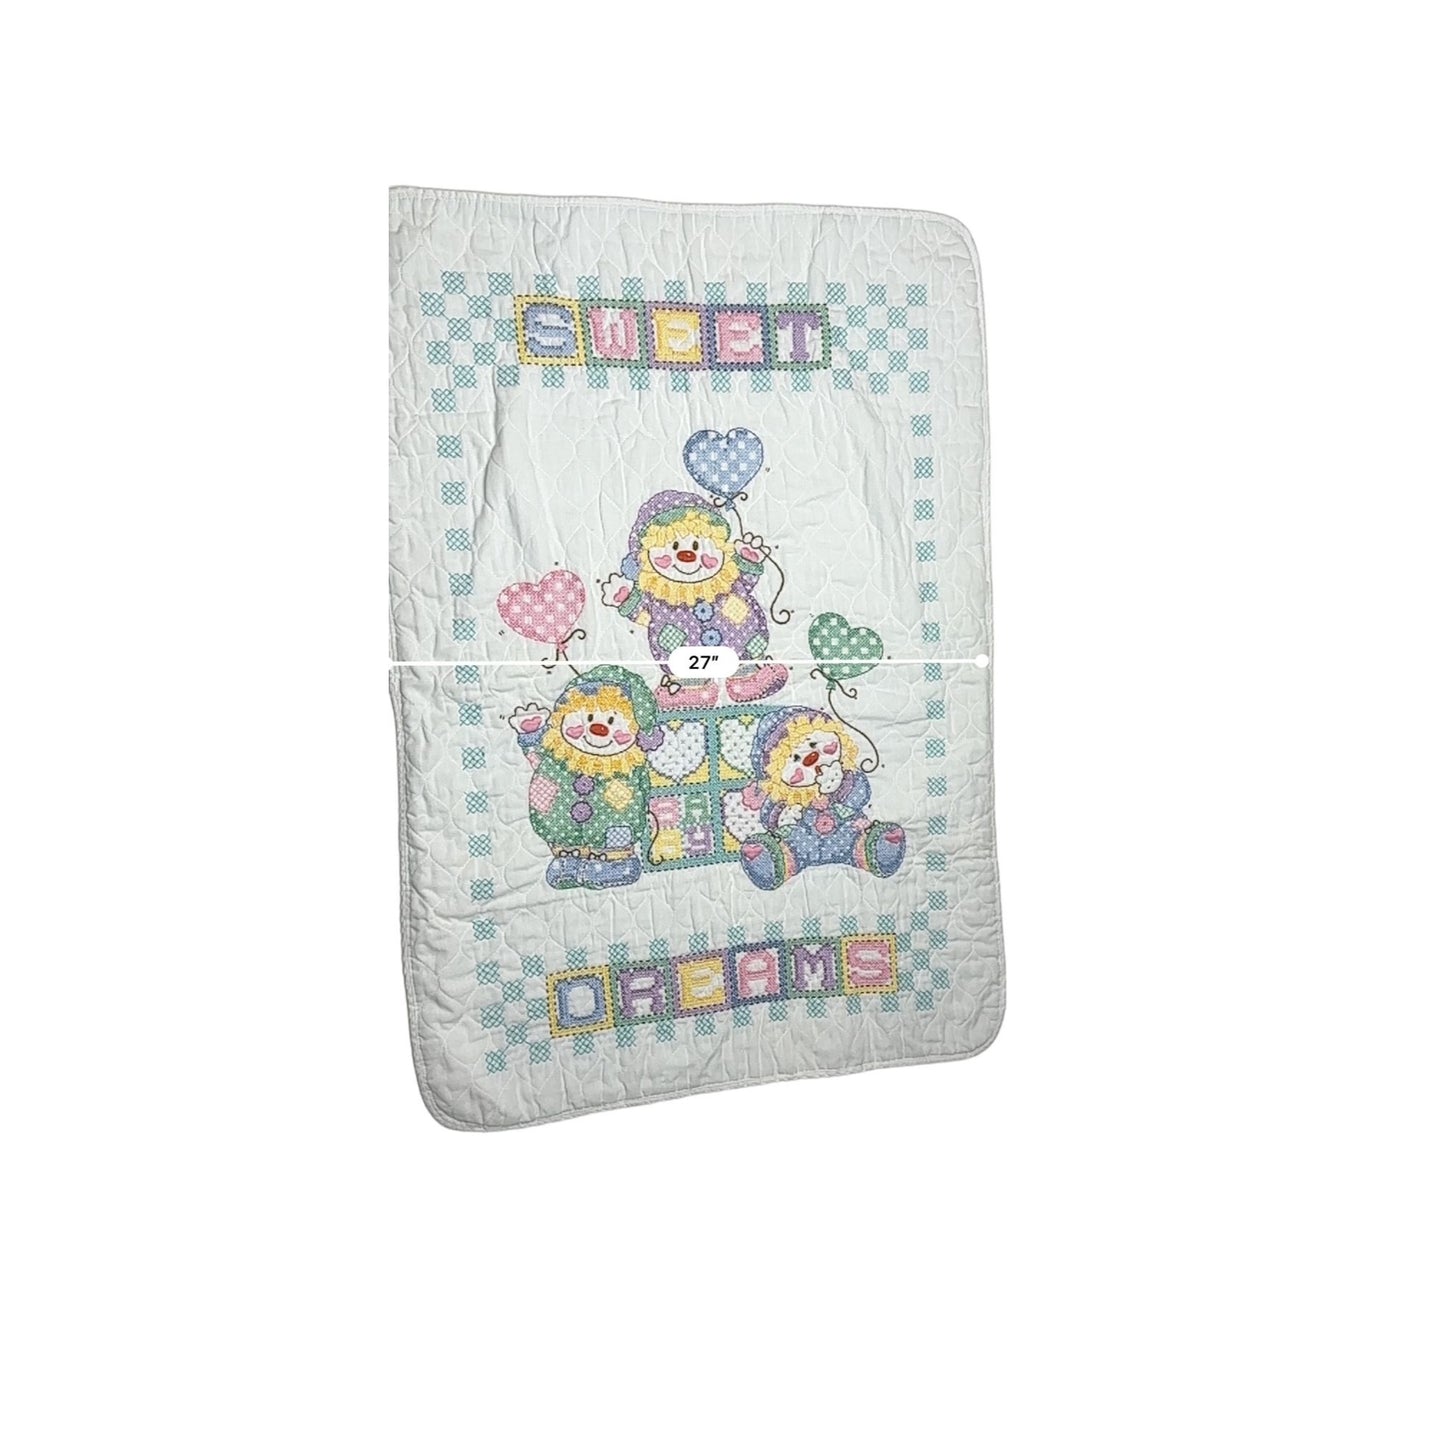 Handmade Baby Blanket Embroidered Clowns Sweet Dreams Cross Stitch 27"x3' 2"